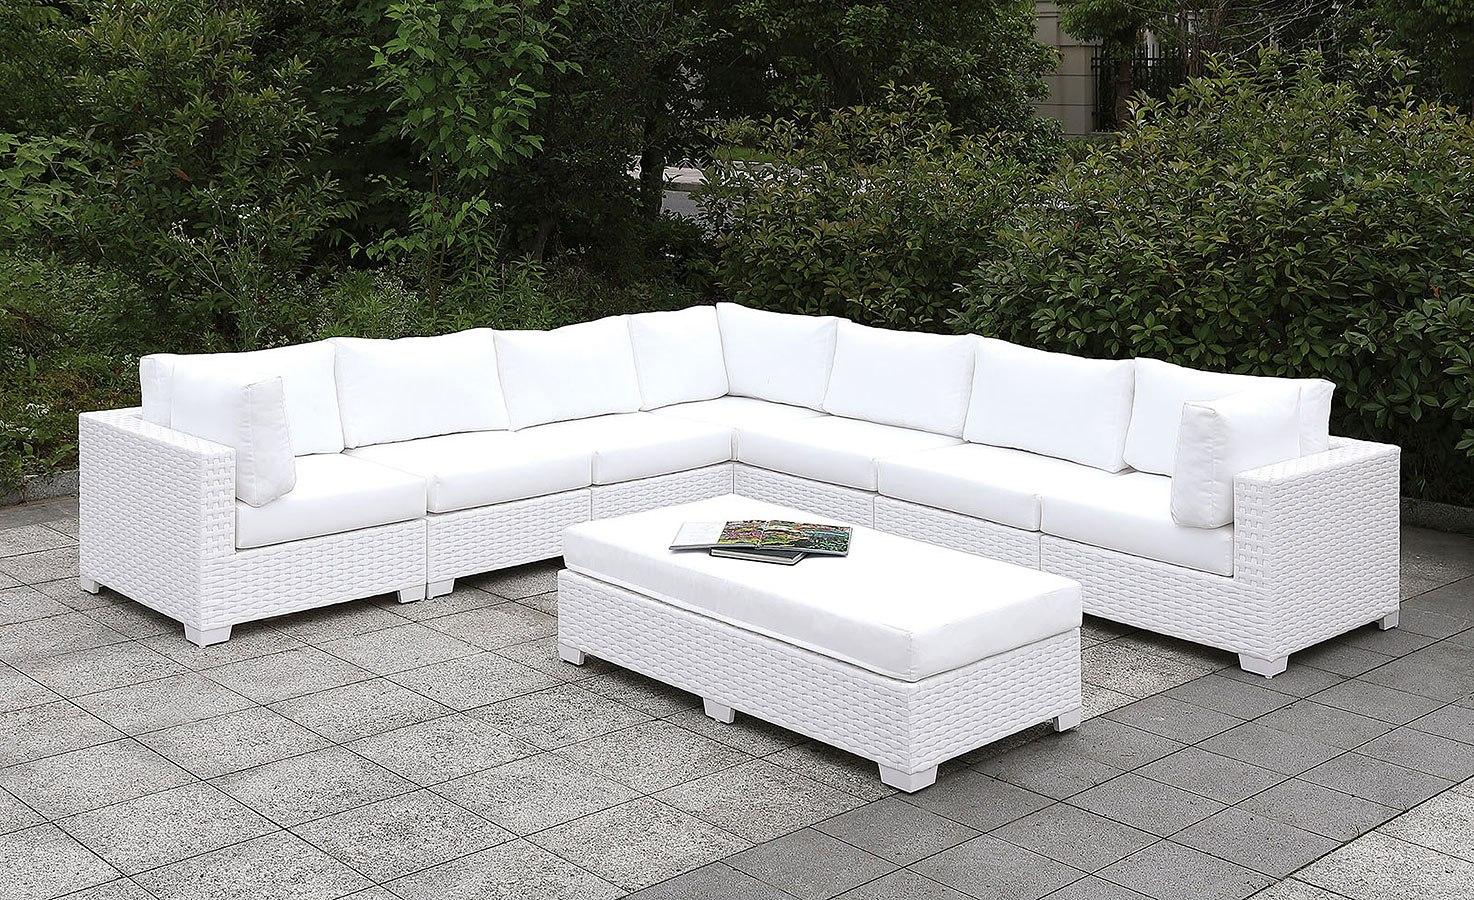 Contemporary Outdoor Sectional Set CM-OS2128WH-SET9 Somani CM-OS2128WH-SET9 in White Wicker